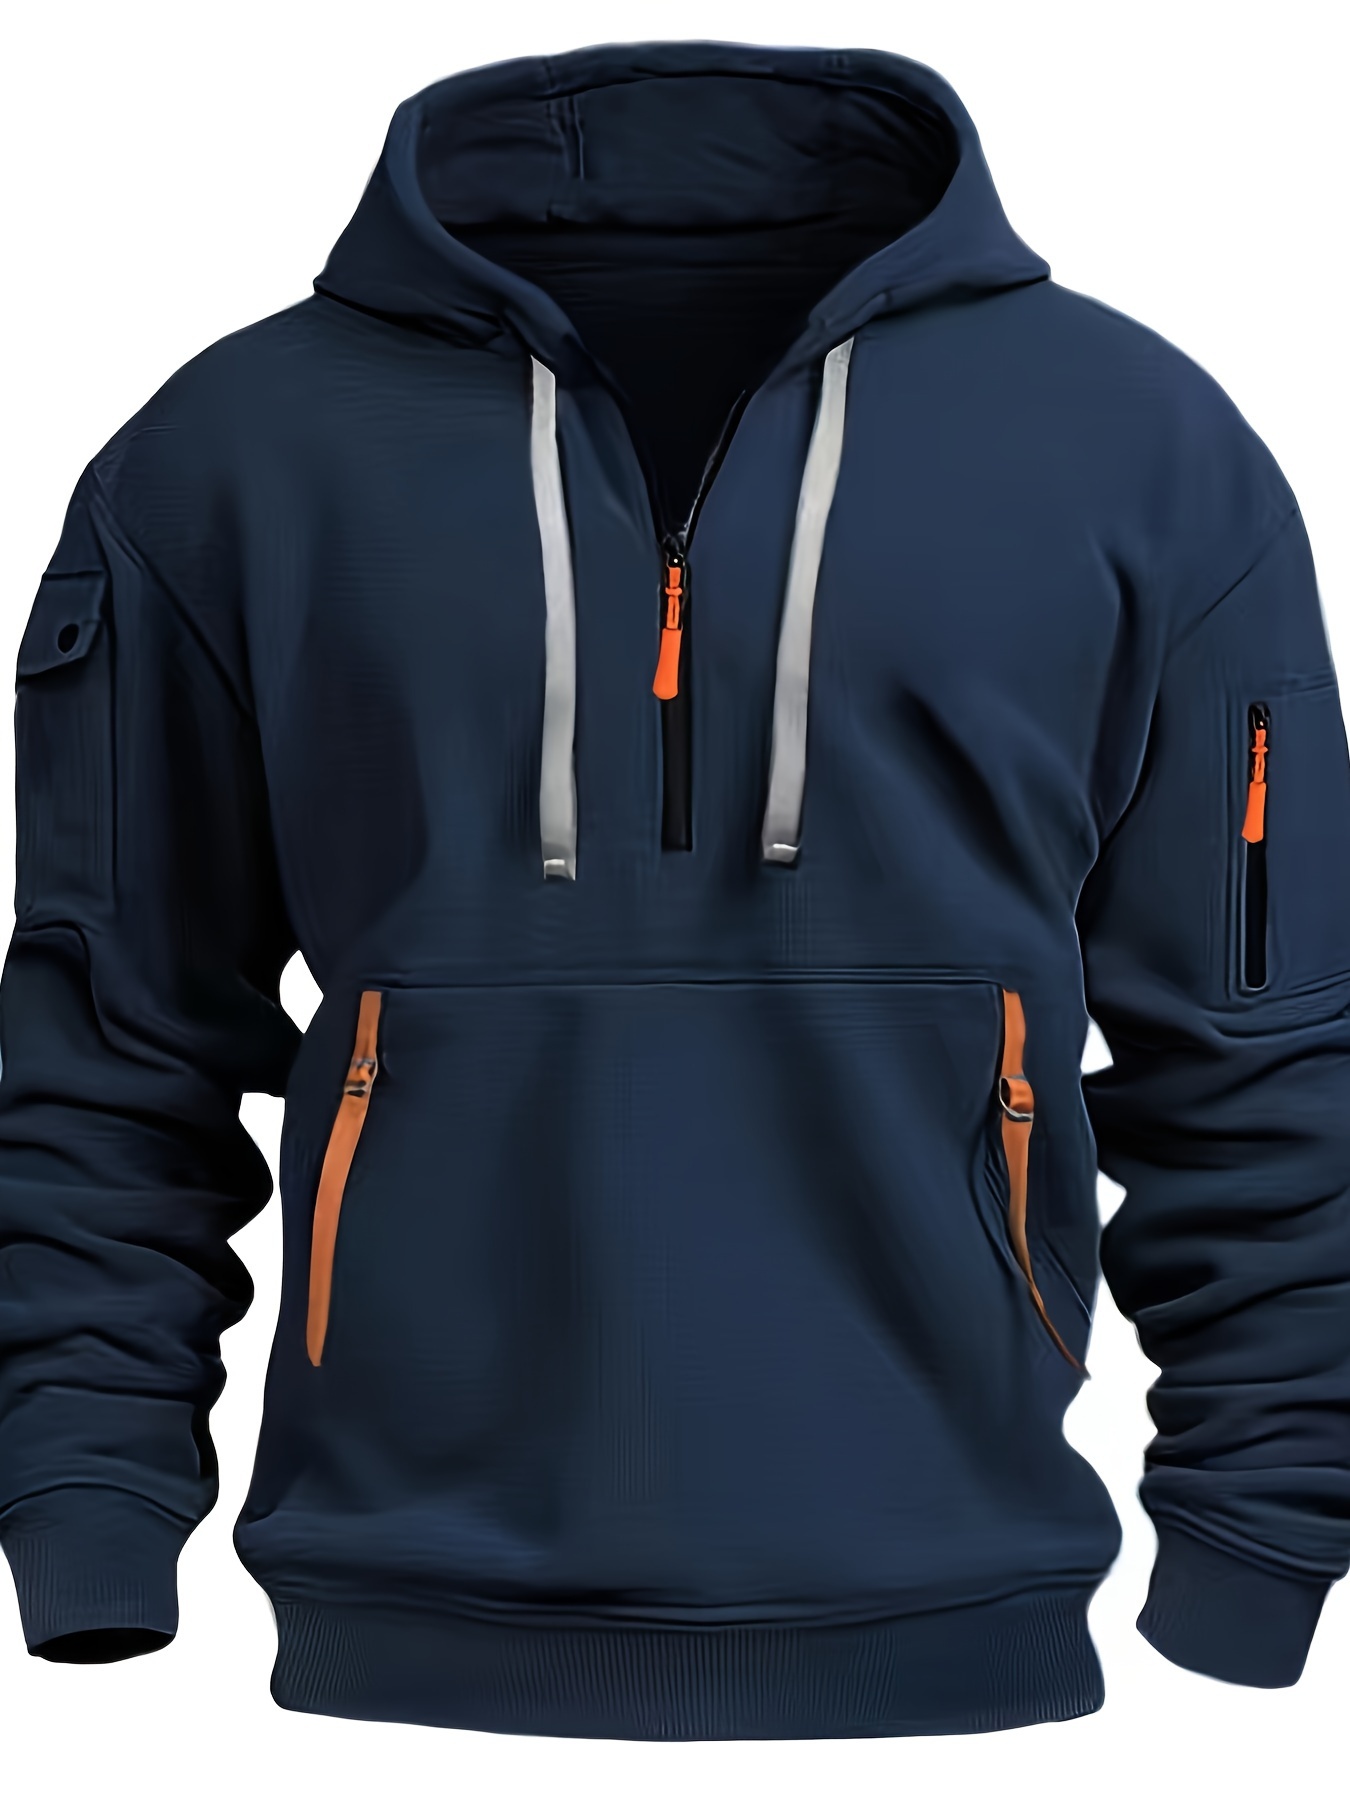 Men's Casual Sport Half-Zip Hoodie With Arm Pocket And Colorful Ribbon Detail, Fashion Pullover Hooded Sweatshirt Outerwear